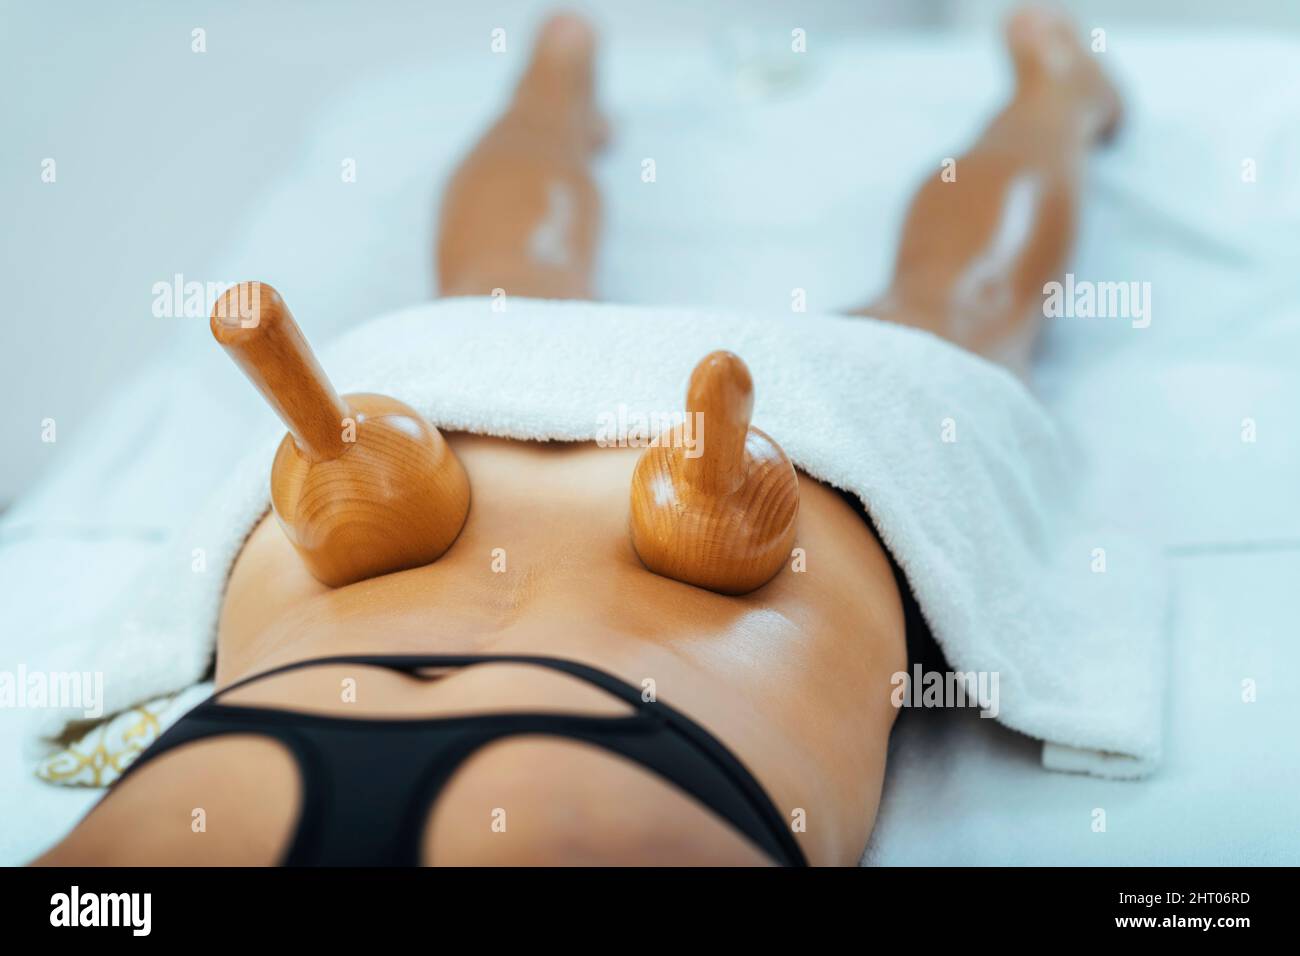 Maderotherapy anti cellulite massage treatment Stock Photo